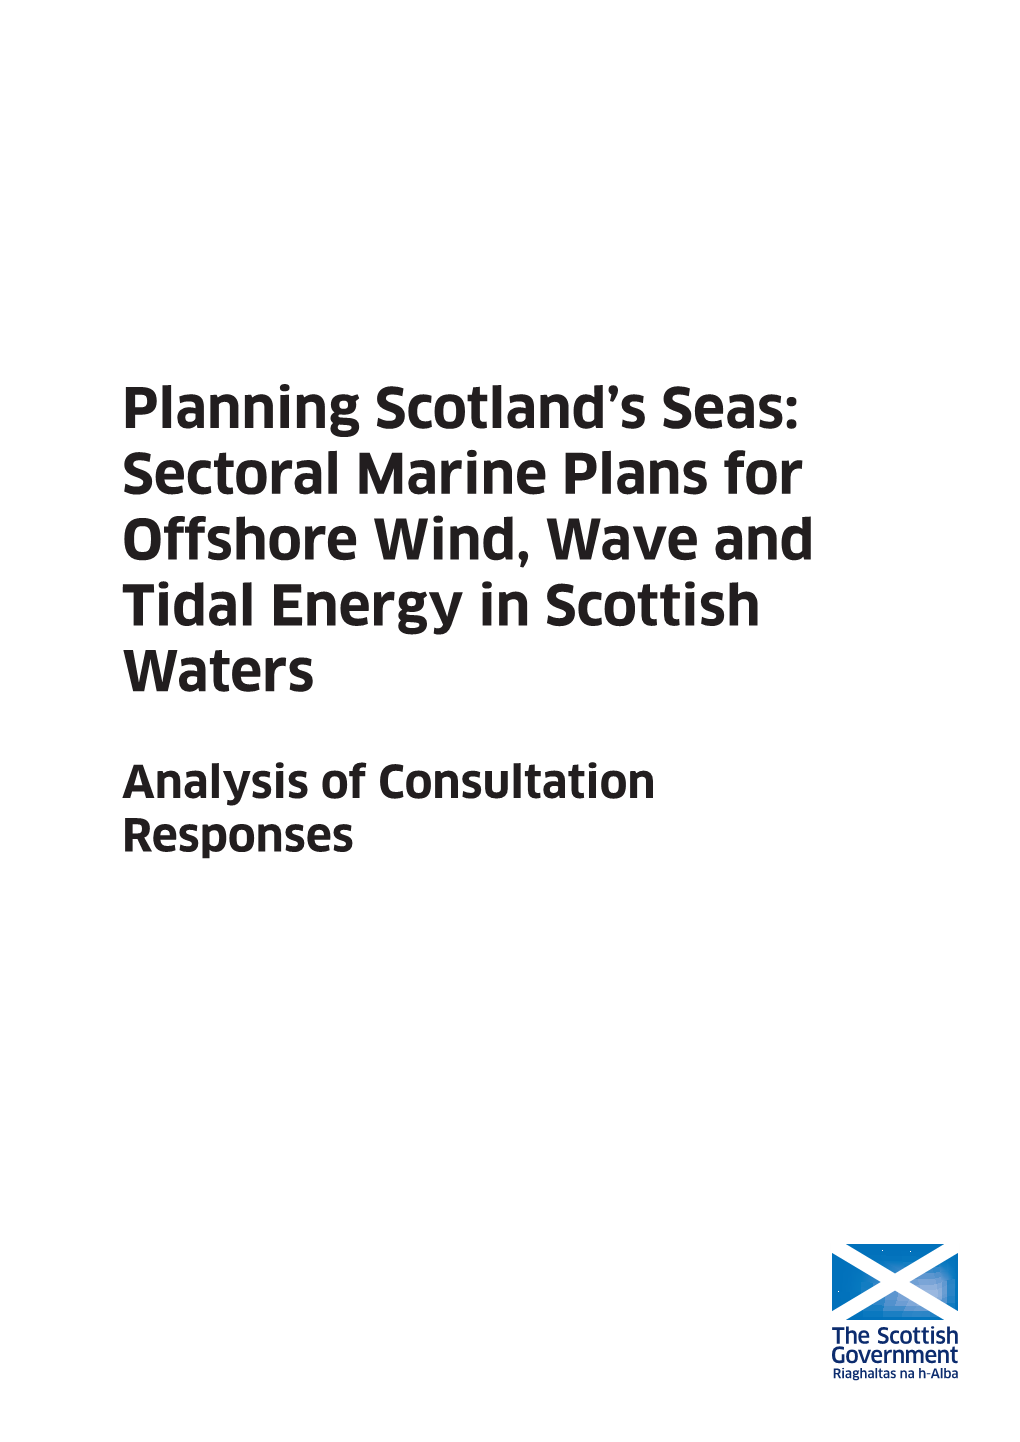 Sectoral Marine Plans for Offshore Wind, Wave and Tidal Energy in Scottish Waters